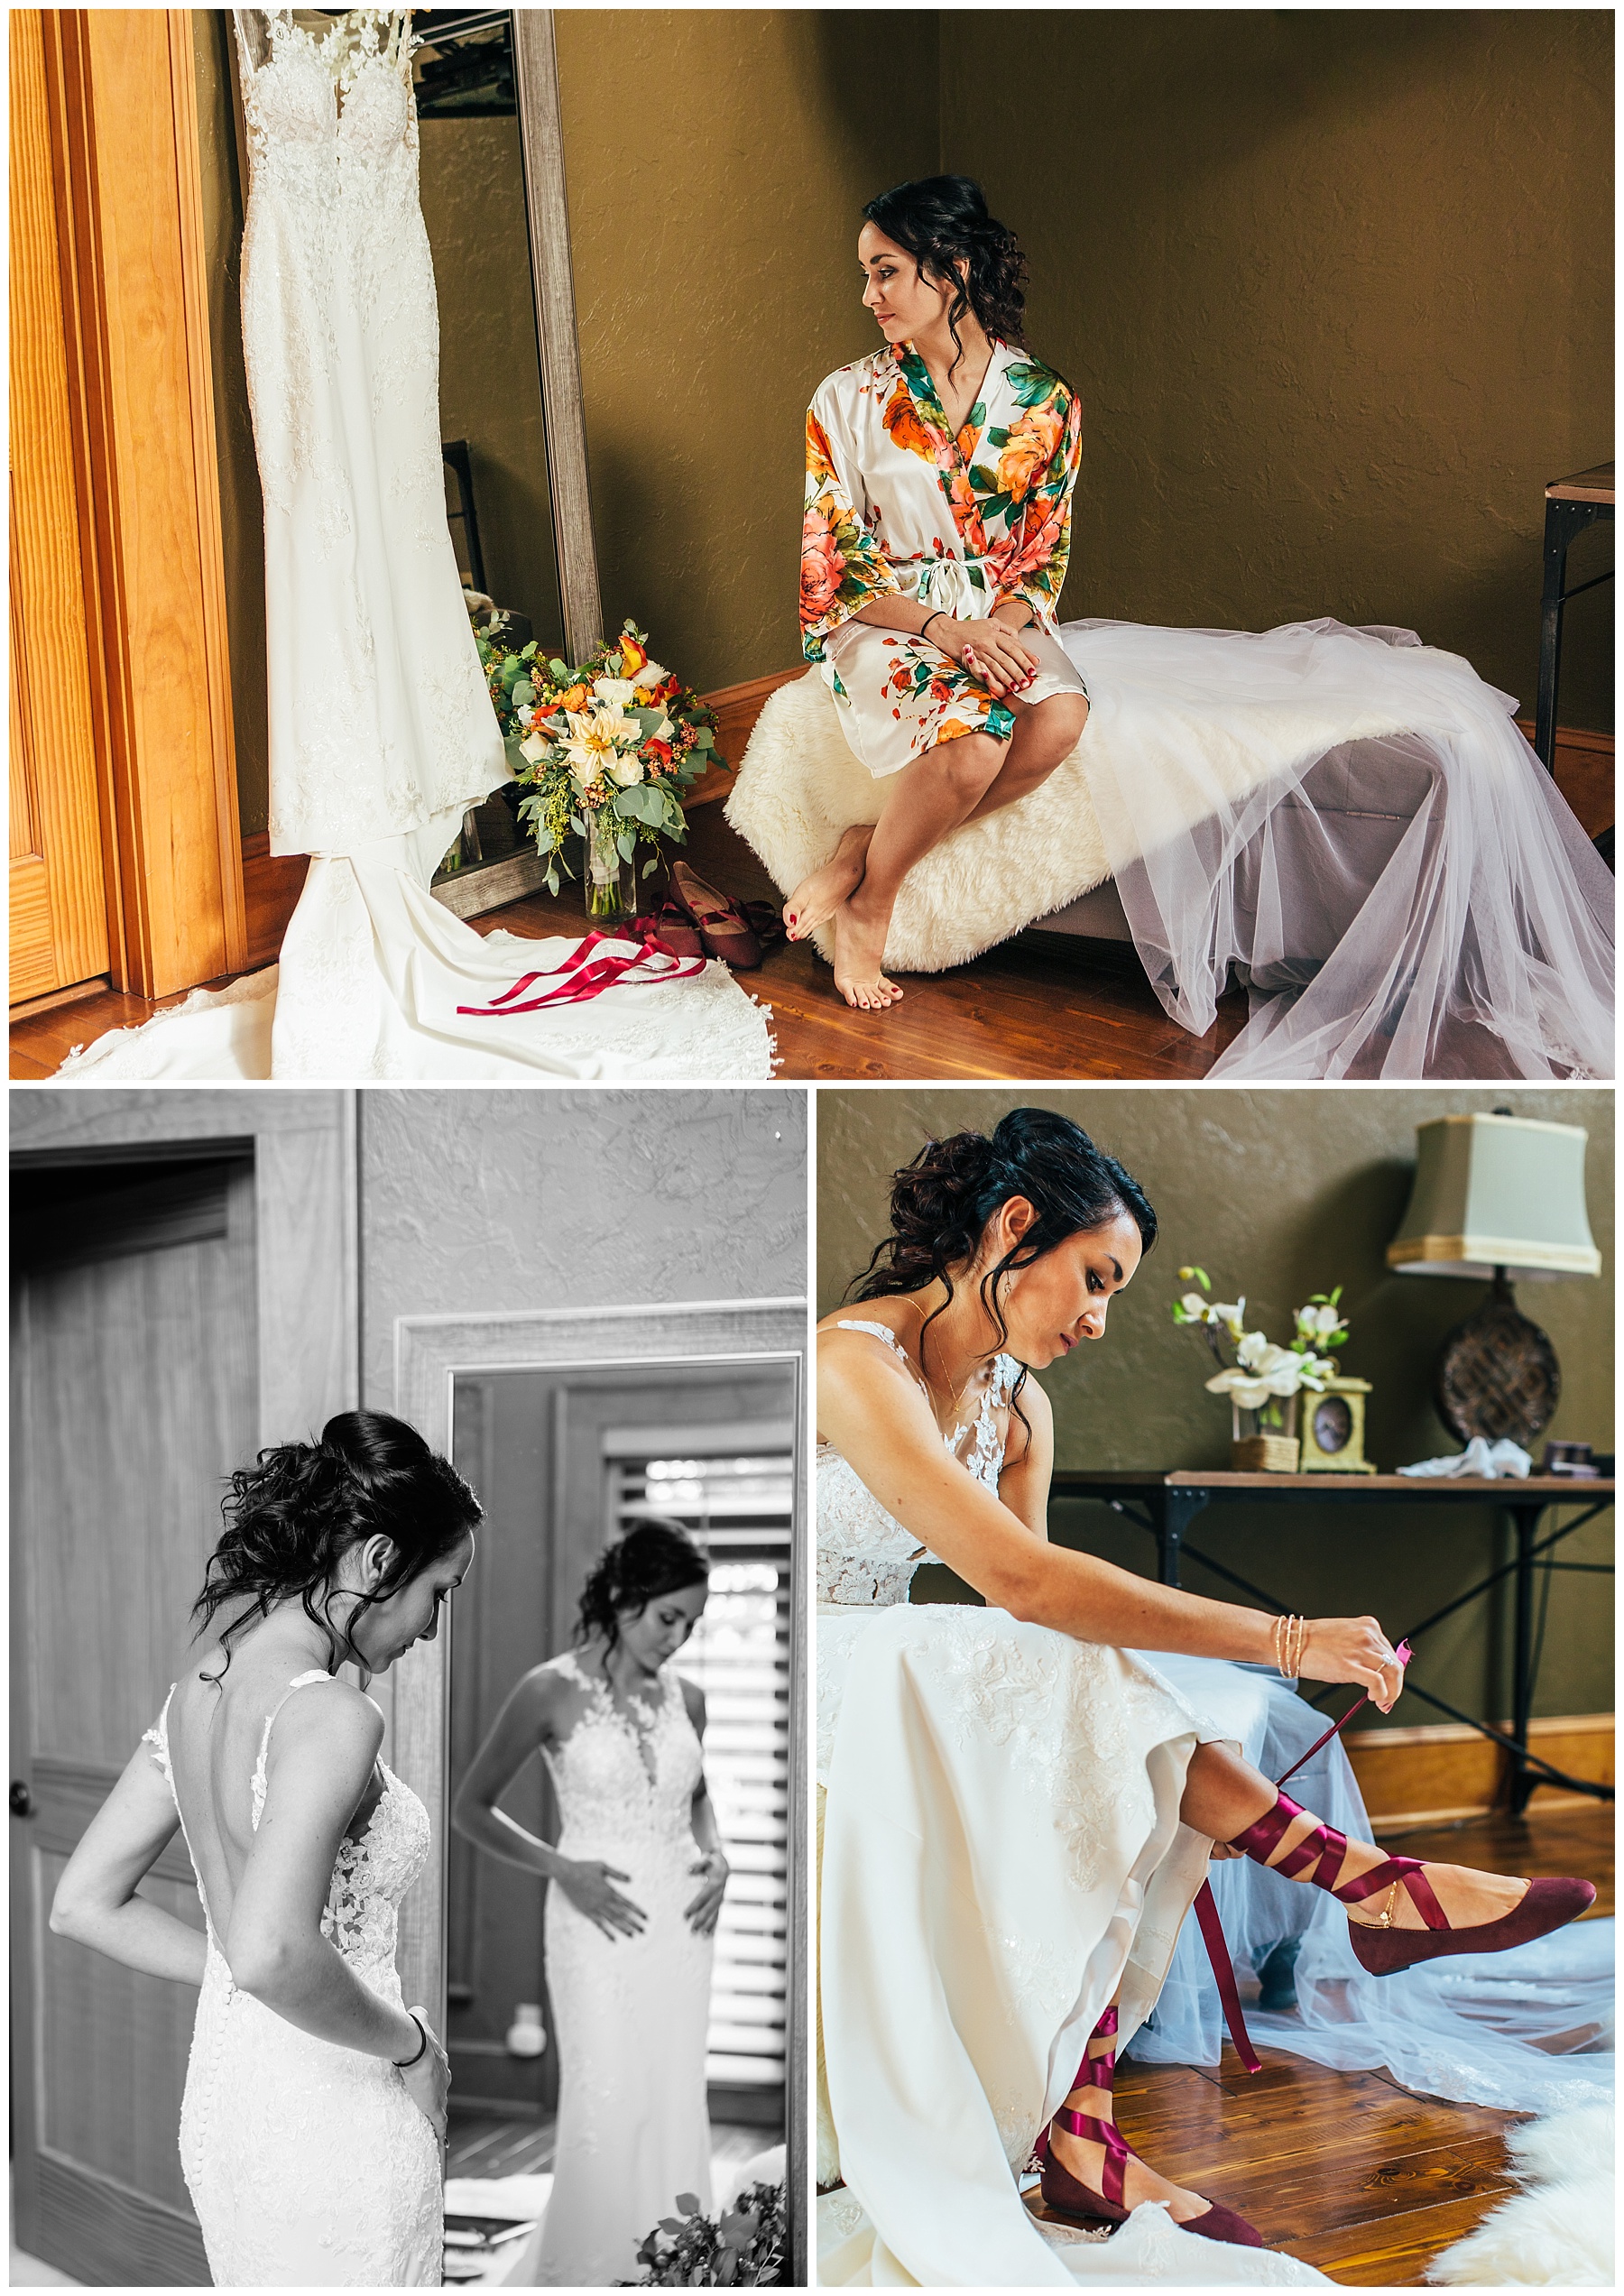 Bride getting ready photo by Natural Craft Photography Boone, NC based wedding photographer